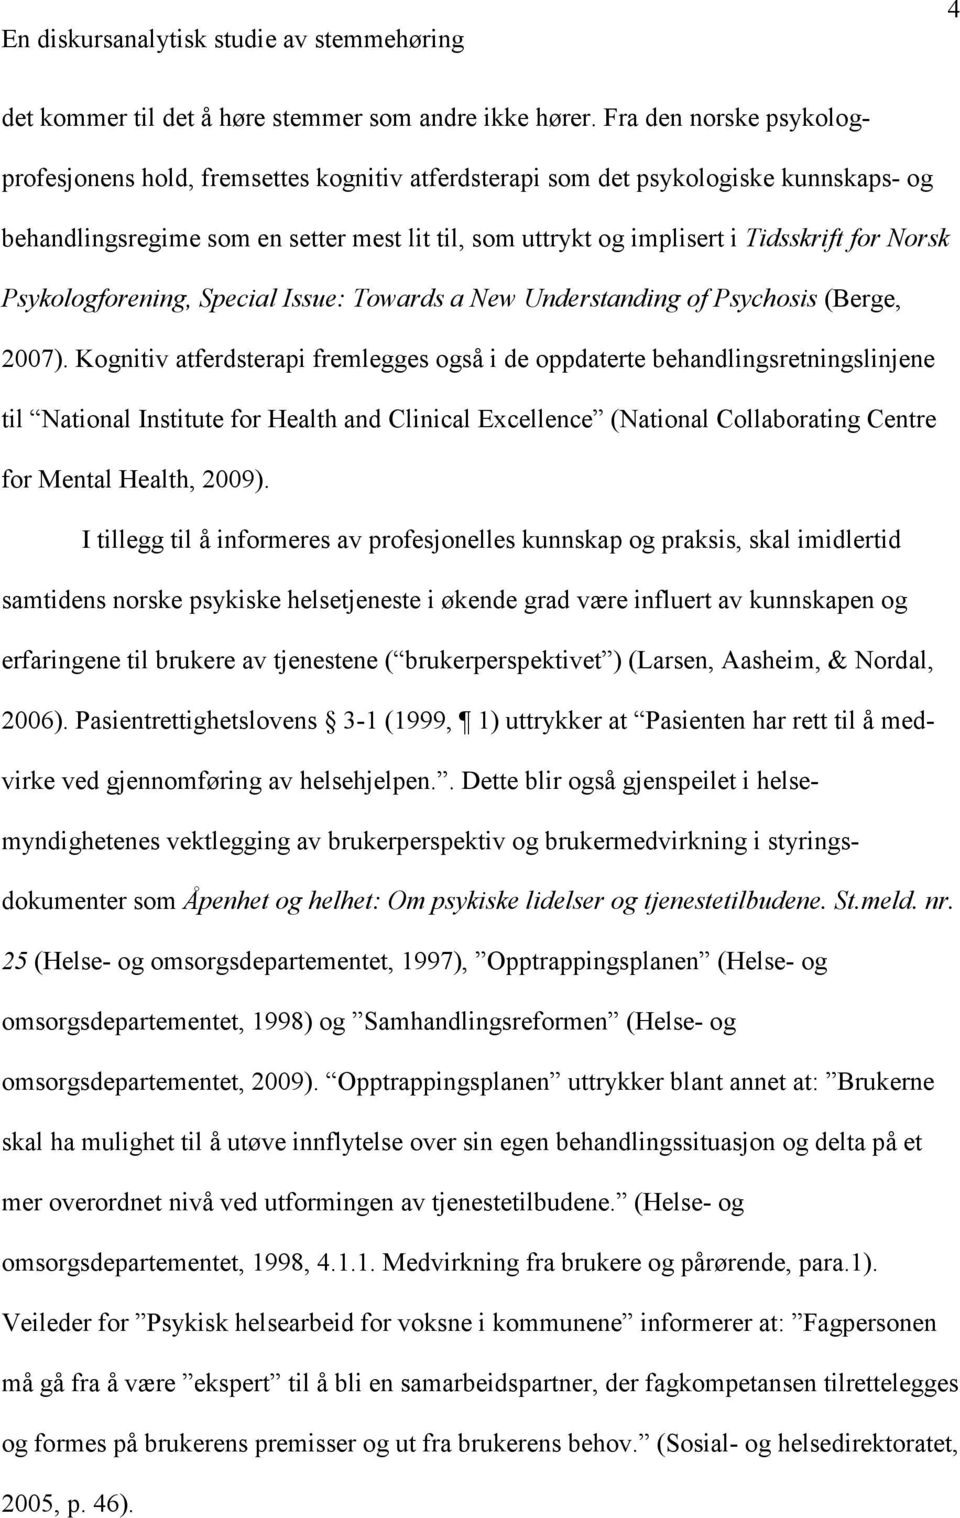 Norsk Psykologforening, Special Issue: Towards a New Understanding of Psychosis (Berge, 2007).